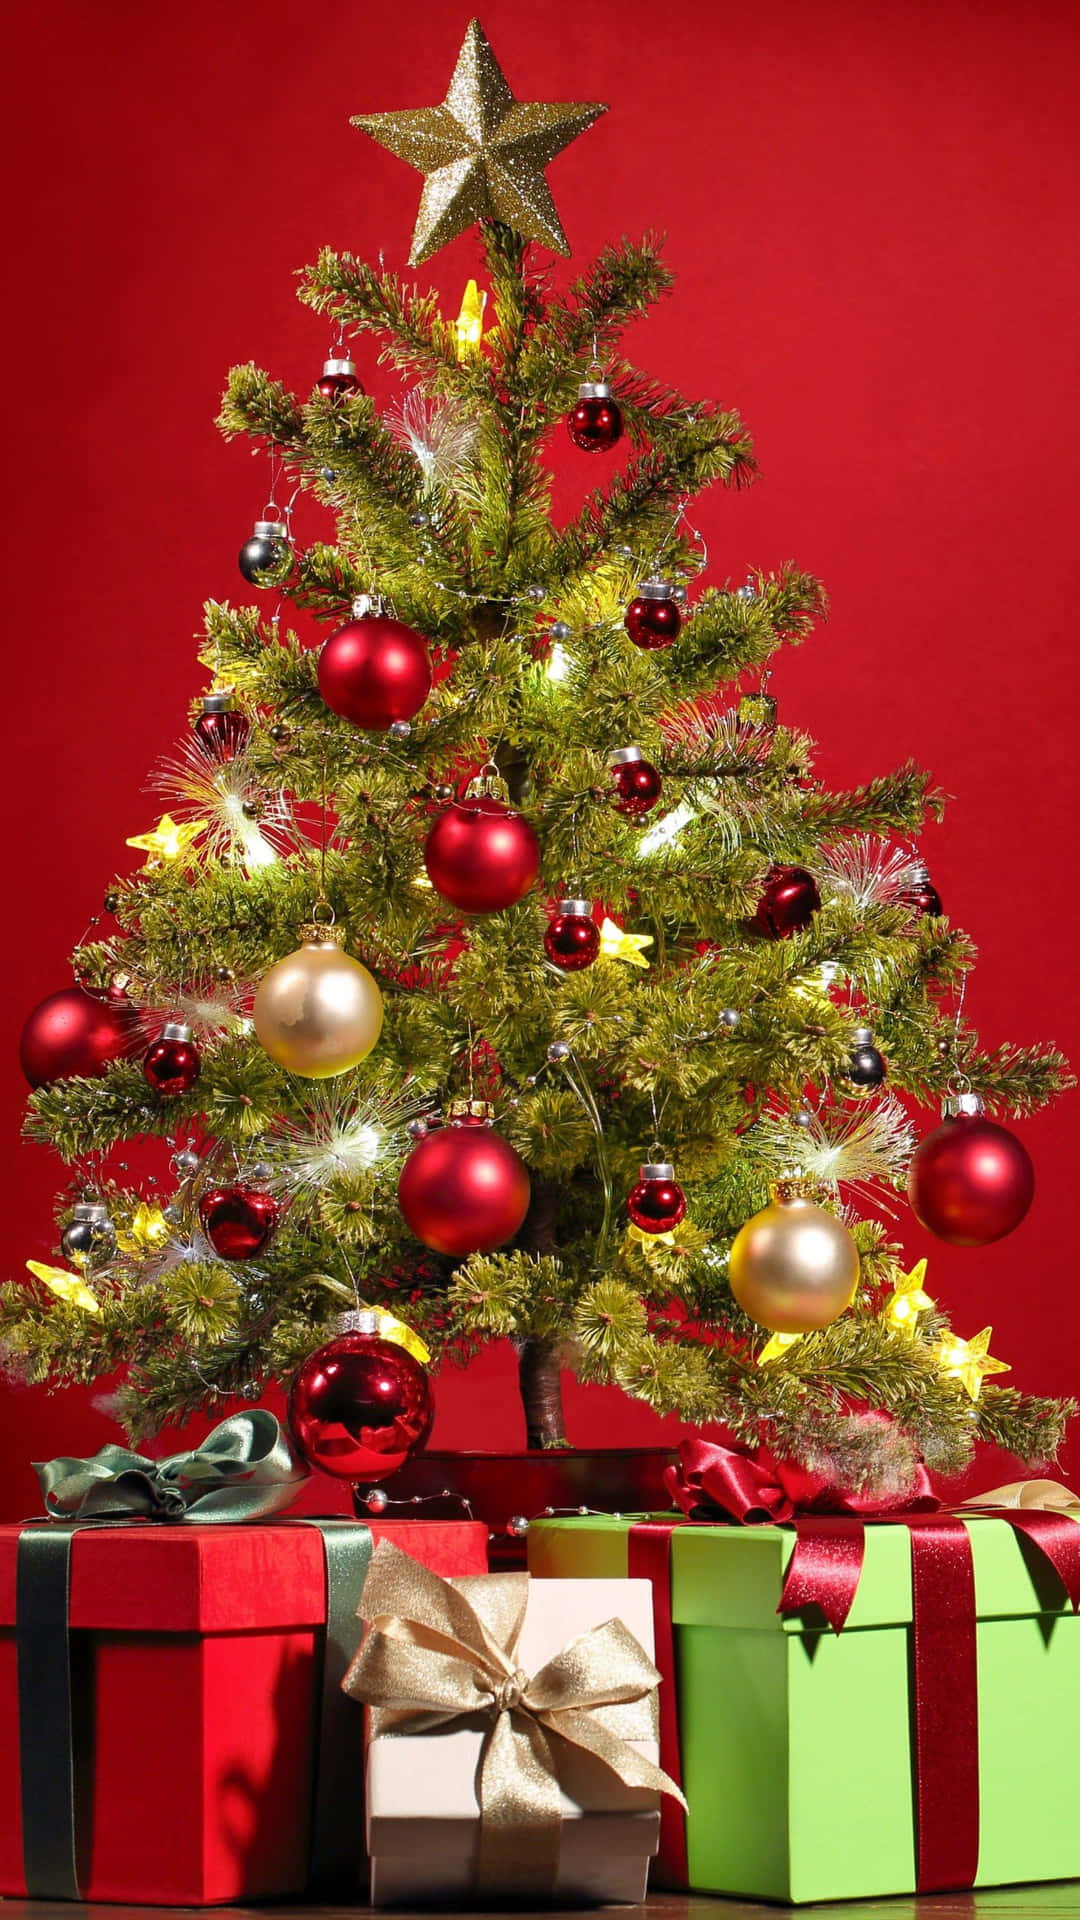 Festive Christmas Tree With Gifts.jpg Wallpaper